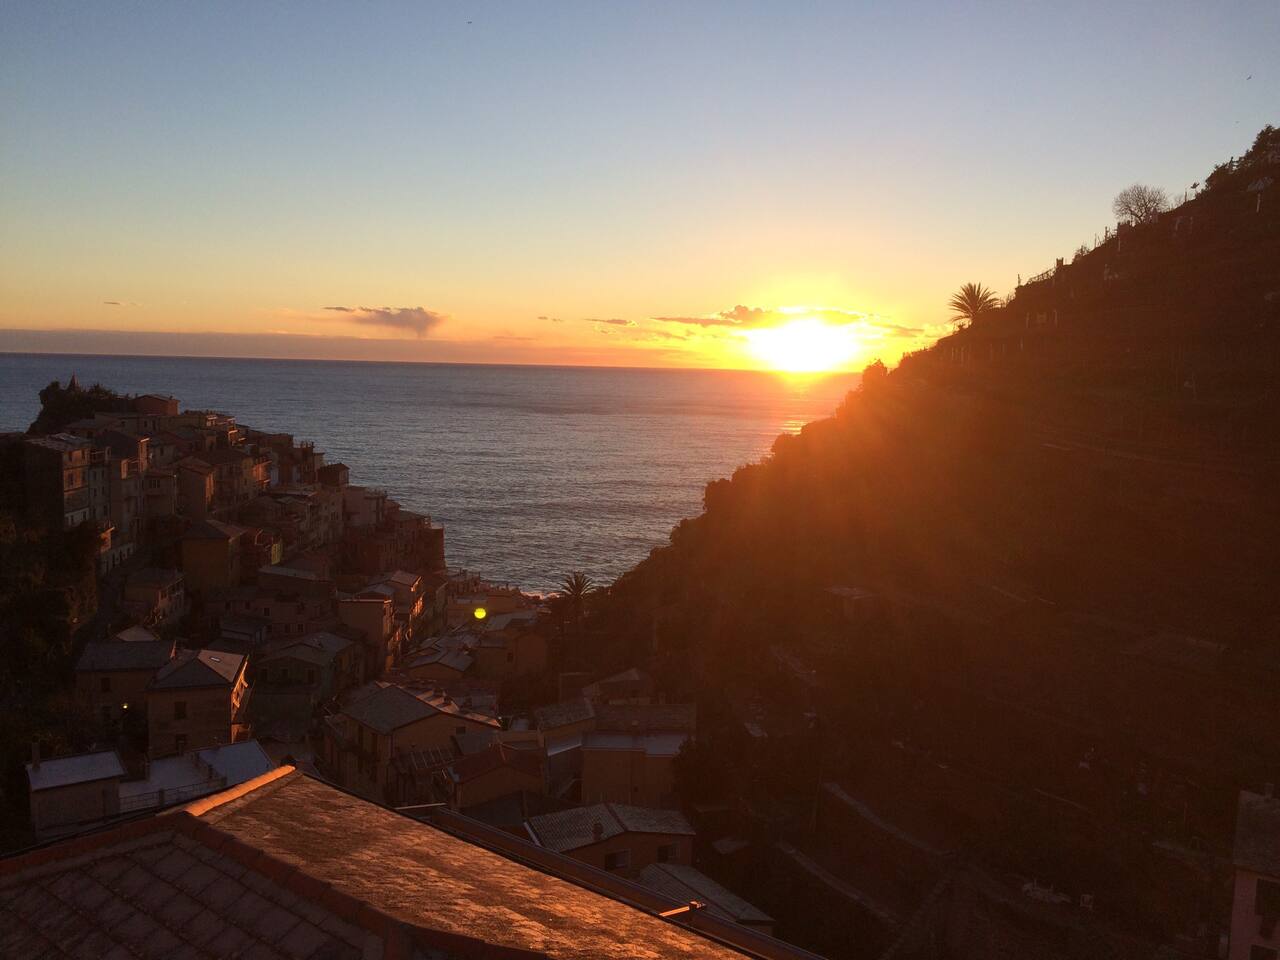 Image of Airbnb rental in Cinque Terre, Italy